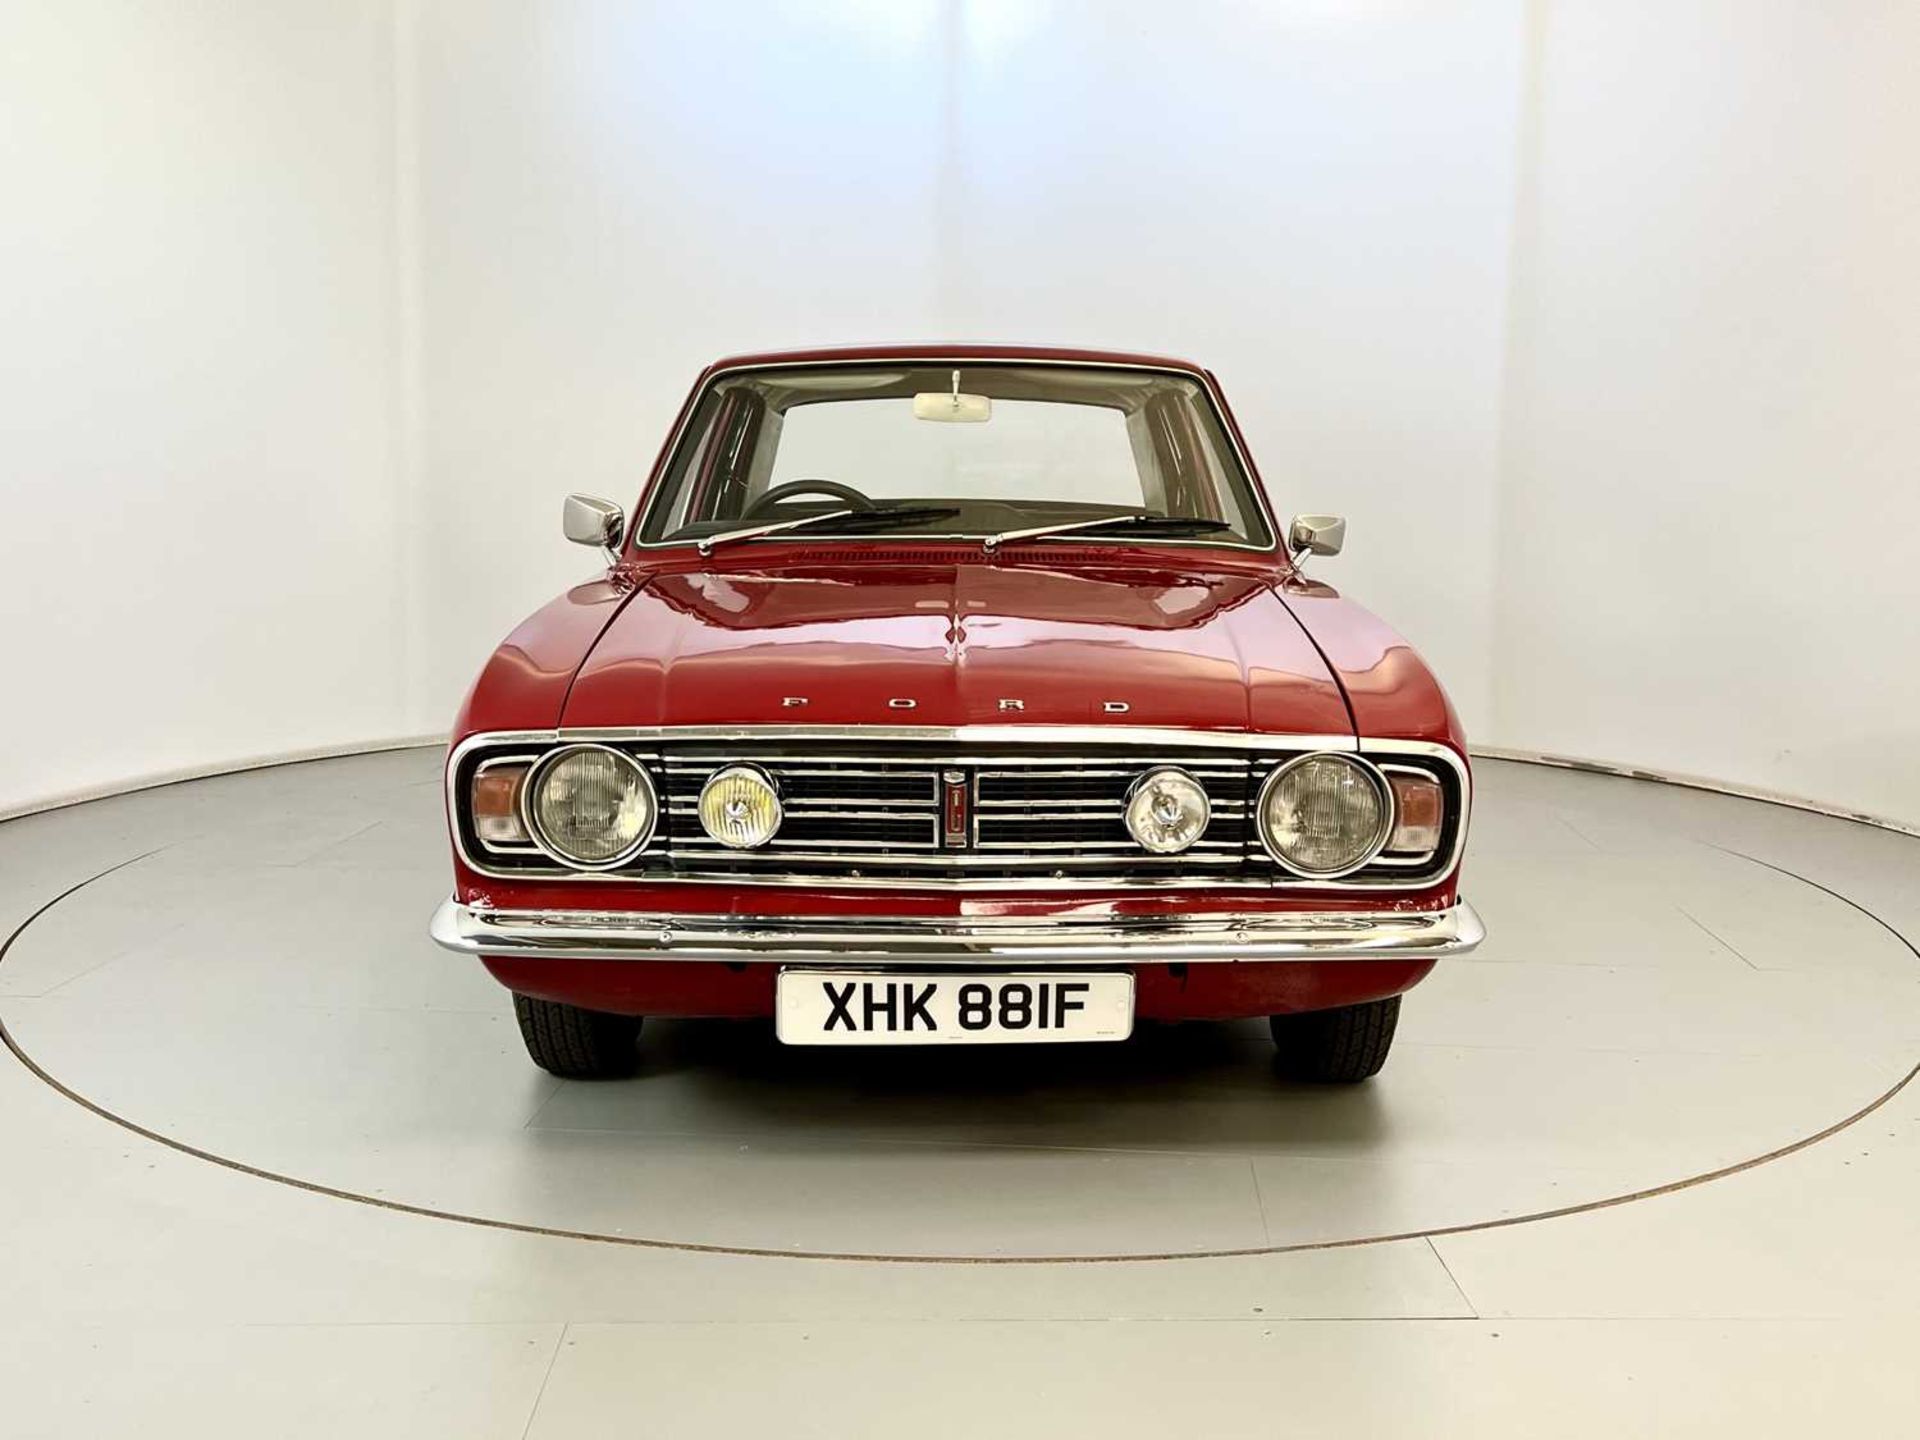 1967 Ford Cortina 1600GT - Image 2 of 37